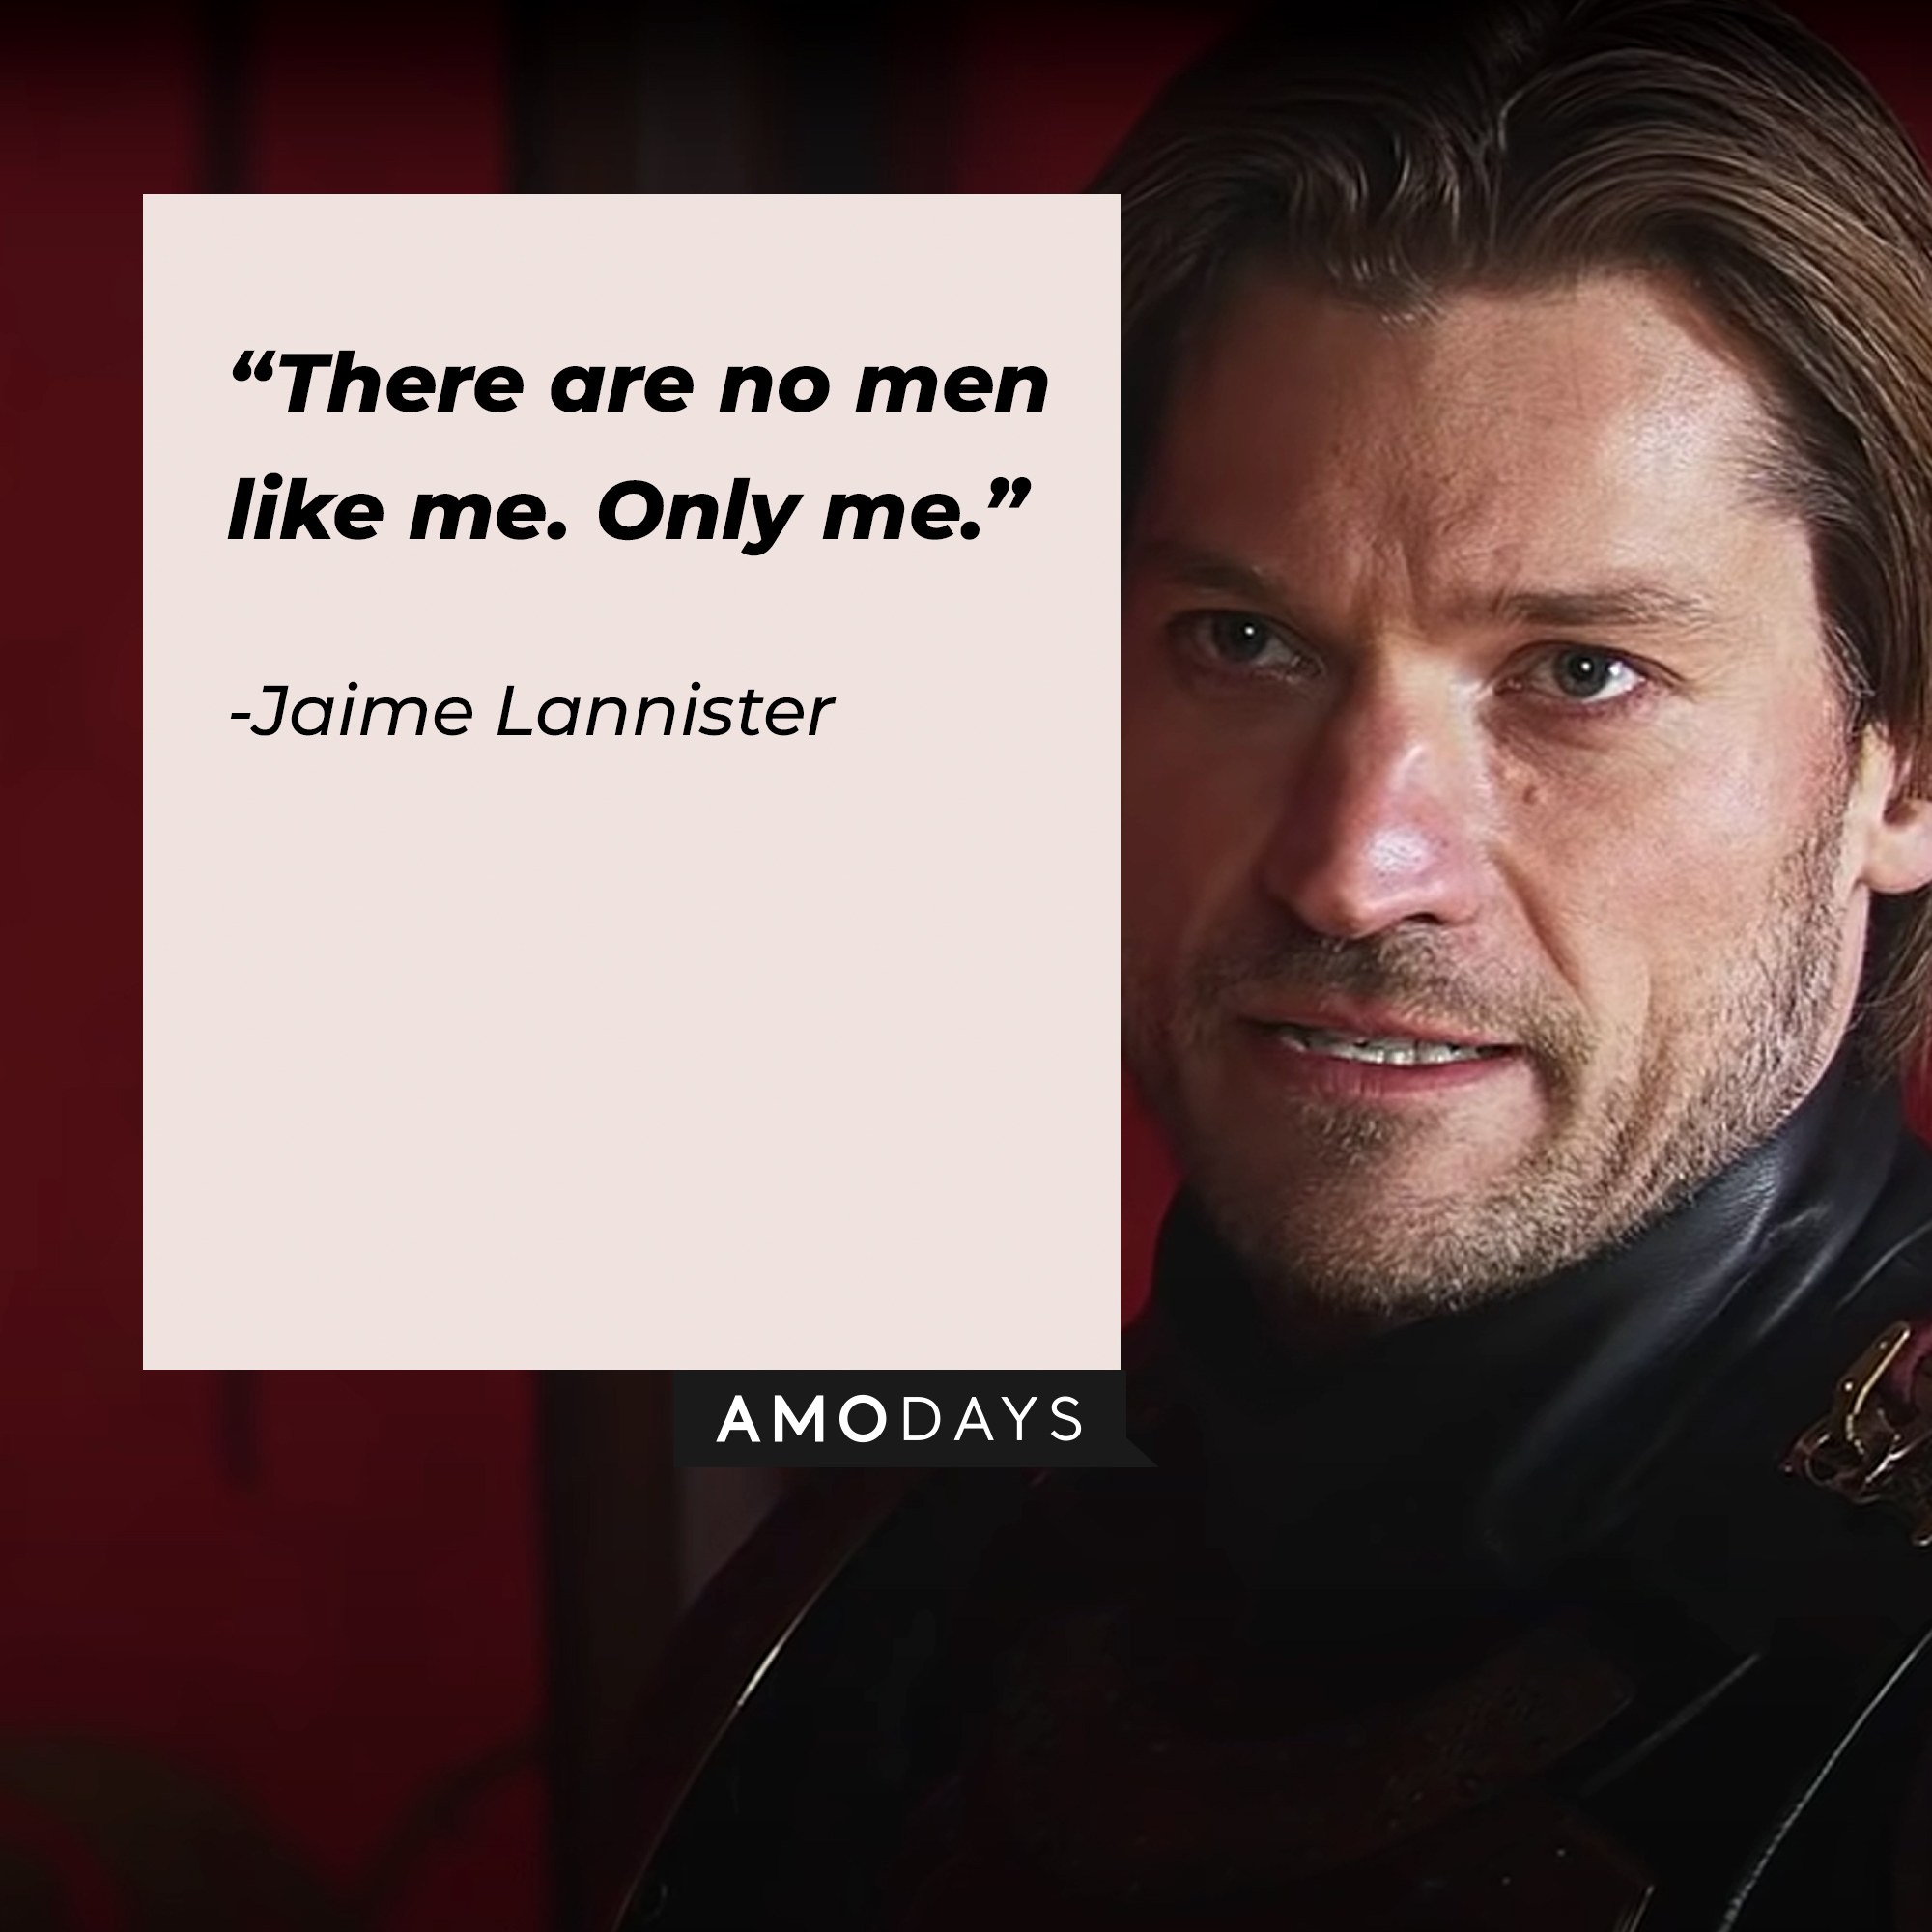 An image of Jaime Lannister, played by Nikolaj Coster-Waldau, with his quote: "There are no men like me. Only me.” | Source: facebook.com/Game of Thrones